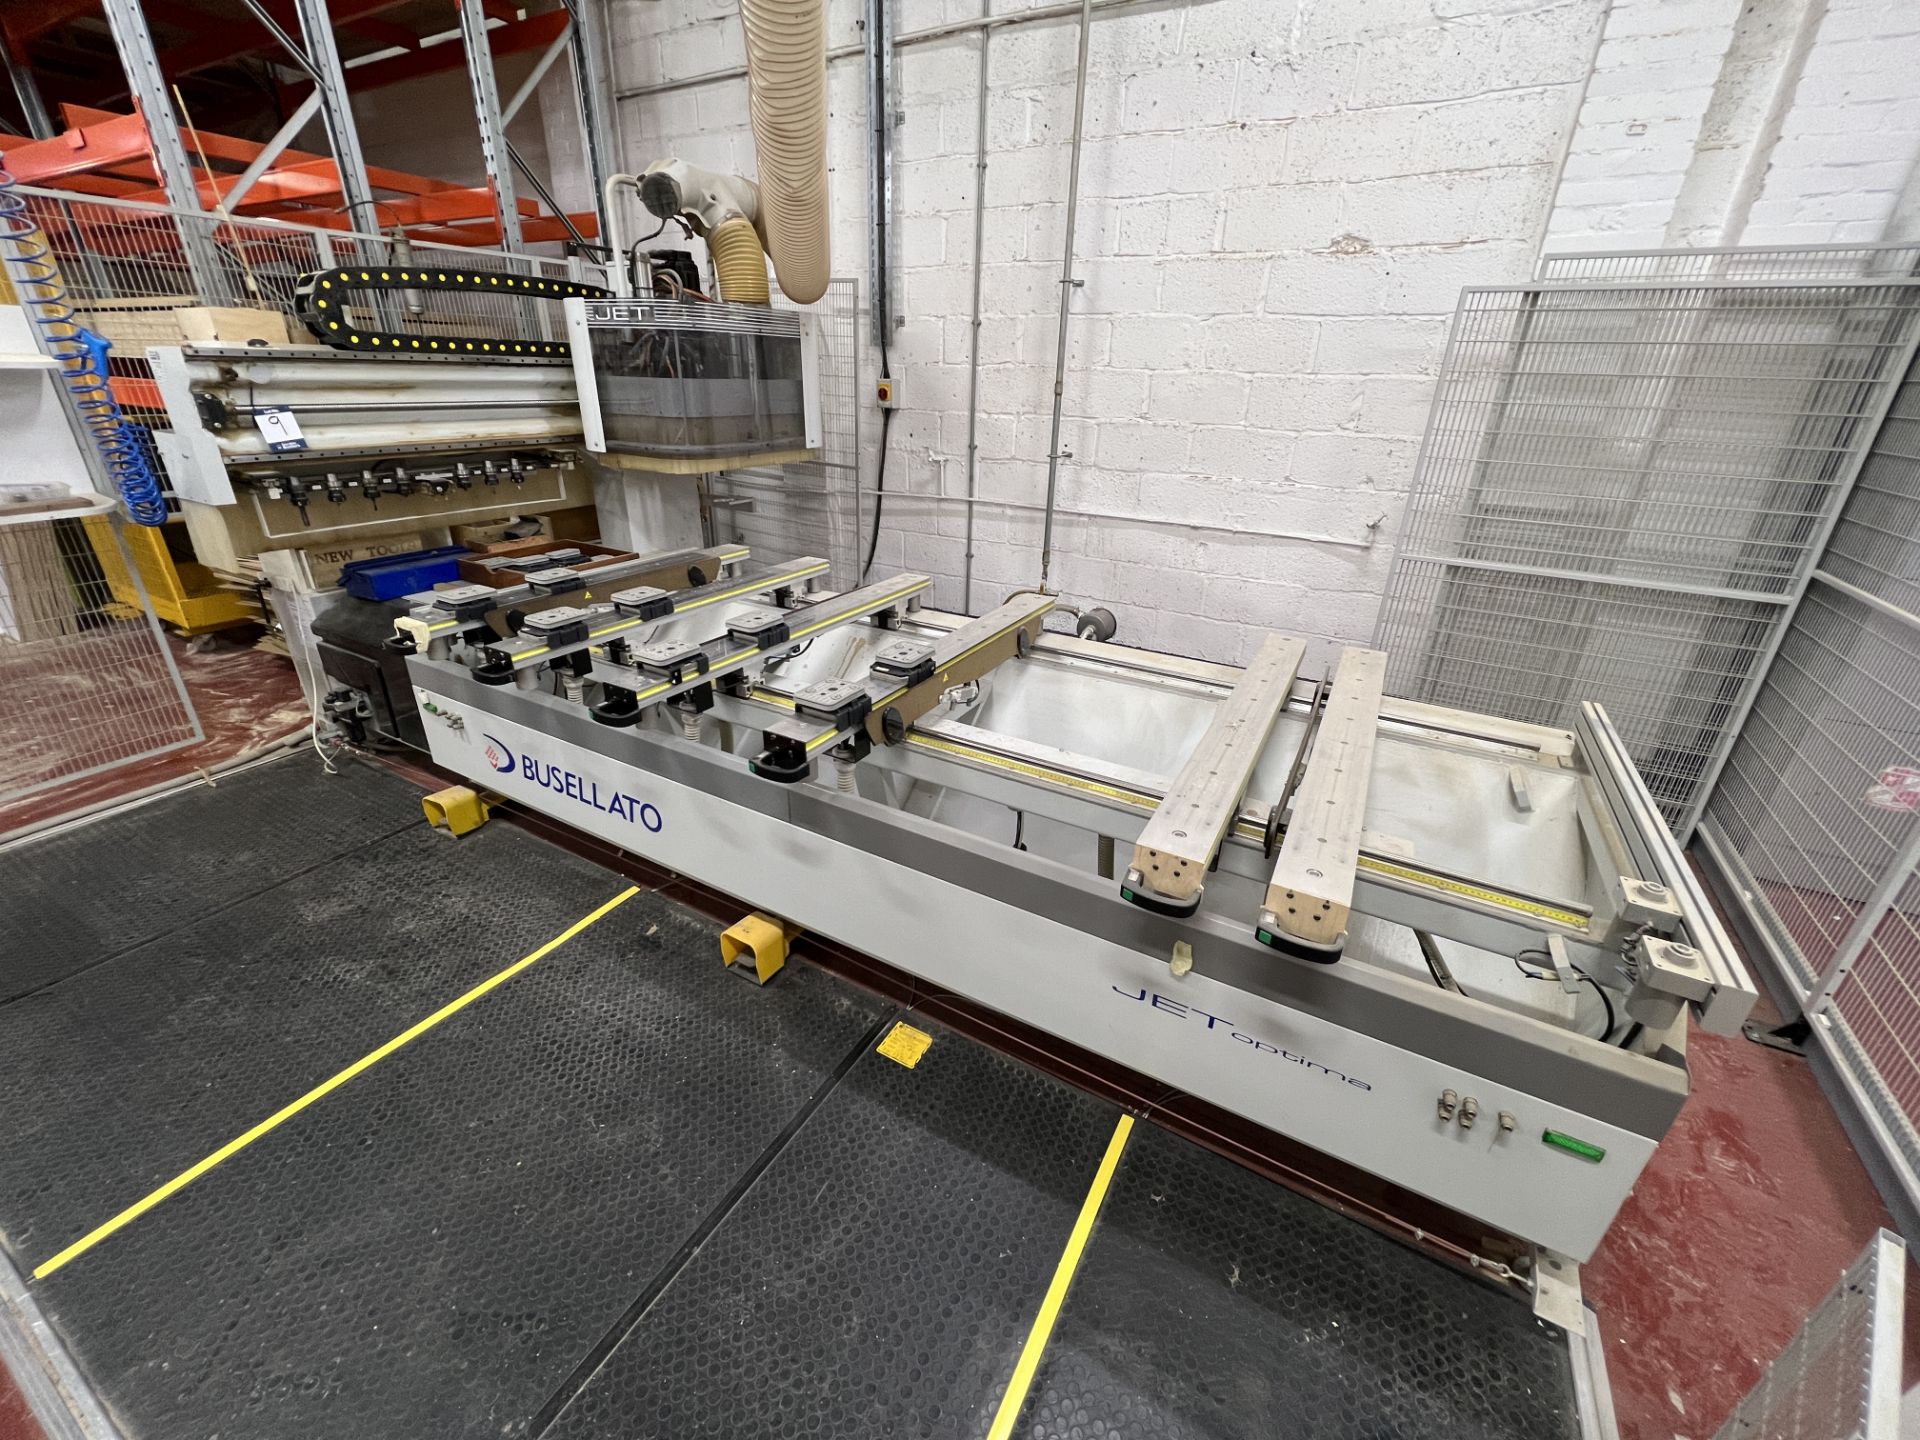 Busellato Jet Optima C1 machining centre fitted with Router head, 8 - position tool changer, - Image 2 of 13